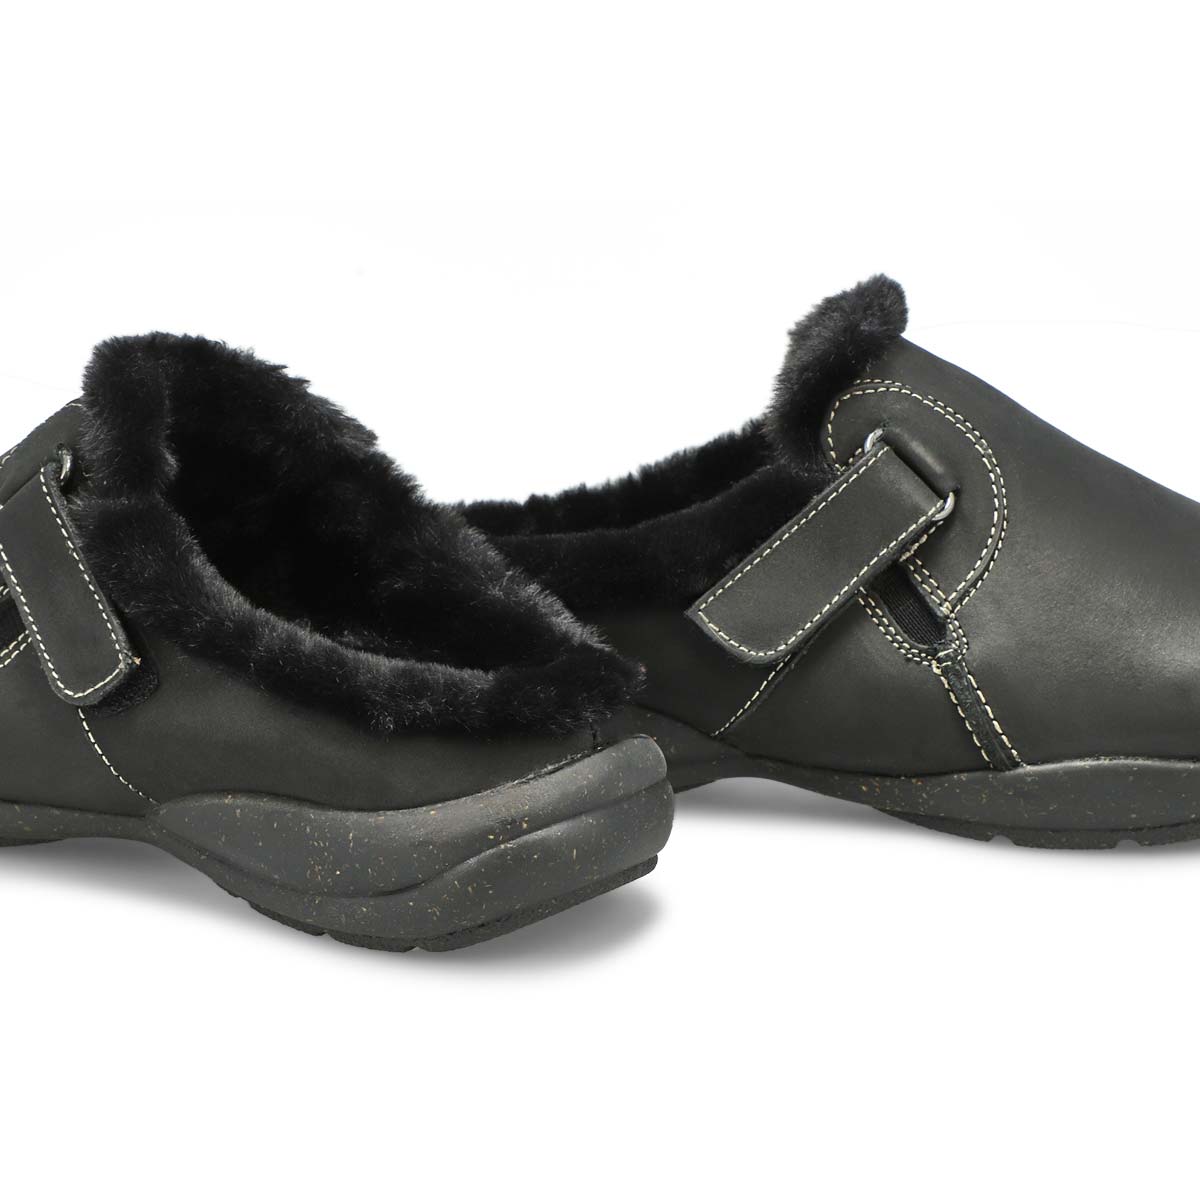 Women's Roseville Casual Low Wide Clog - Black